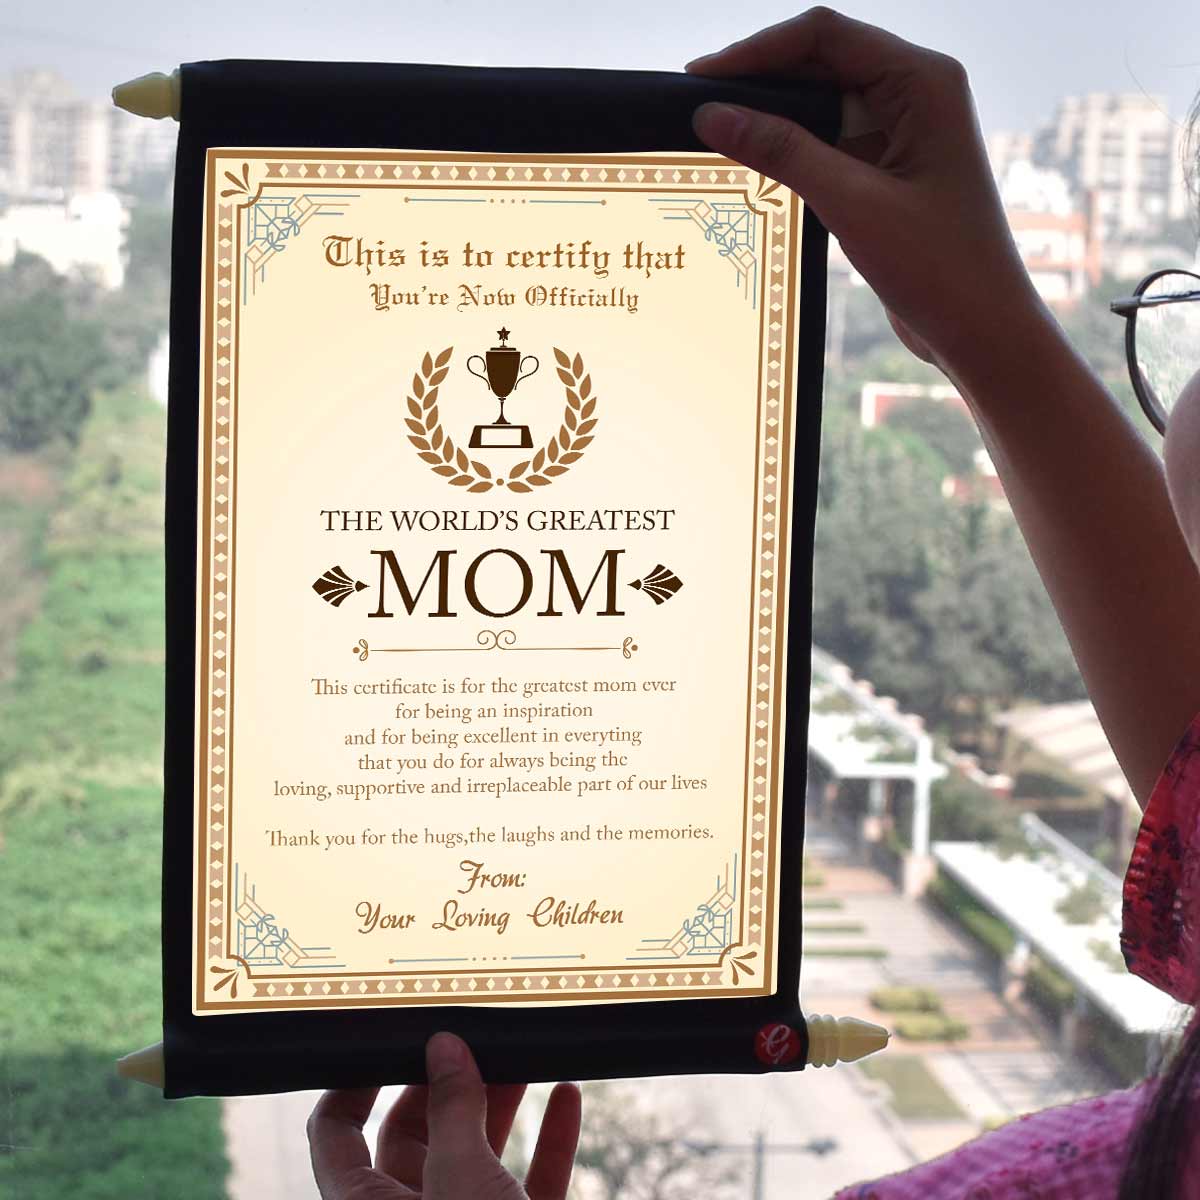 The Worlds Greatest Mom Certificate Scroll-7